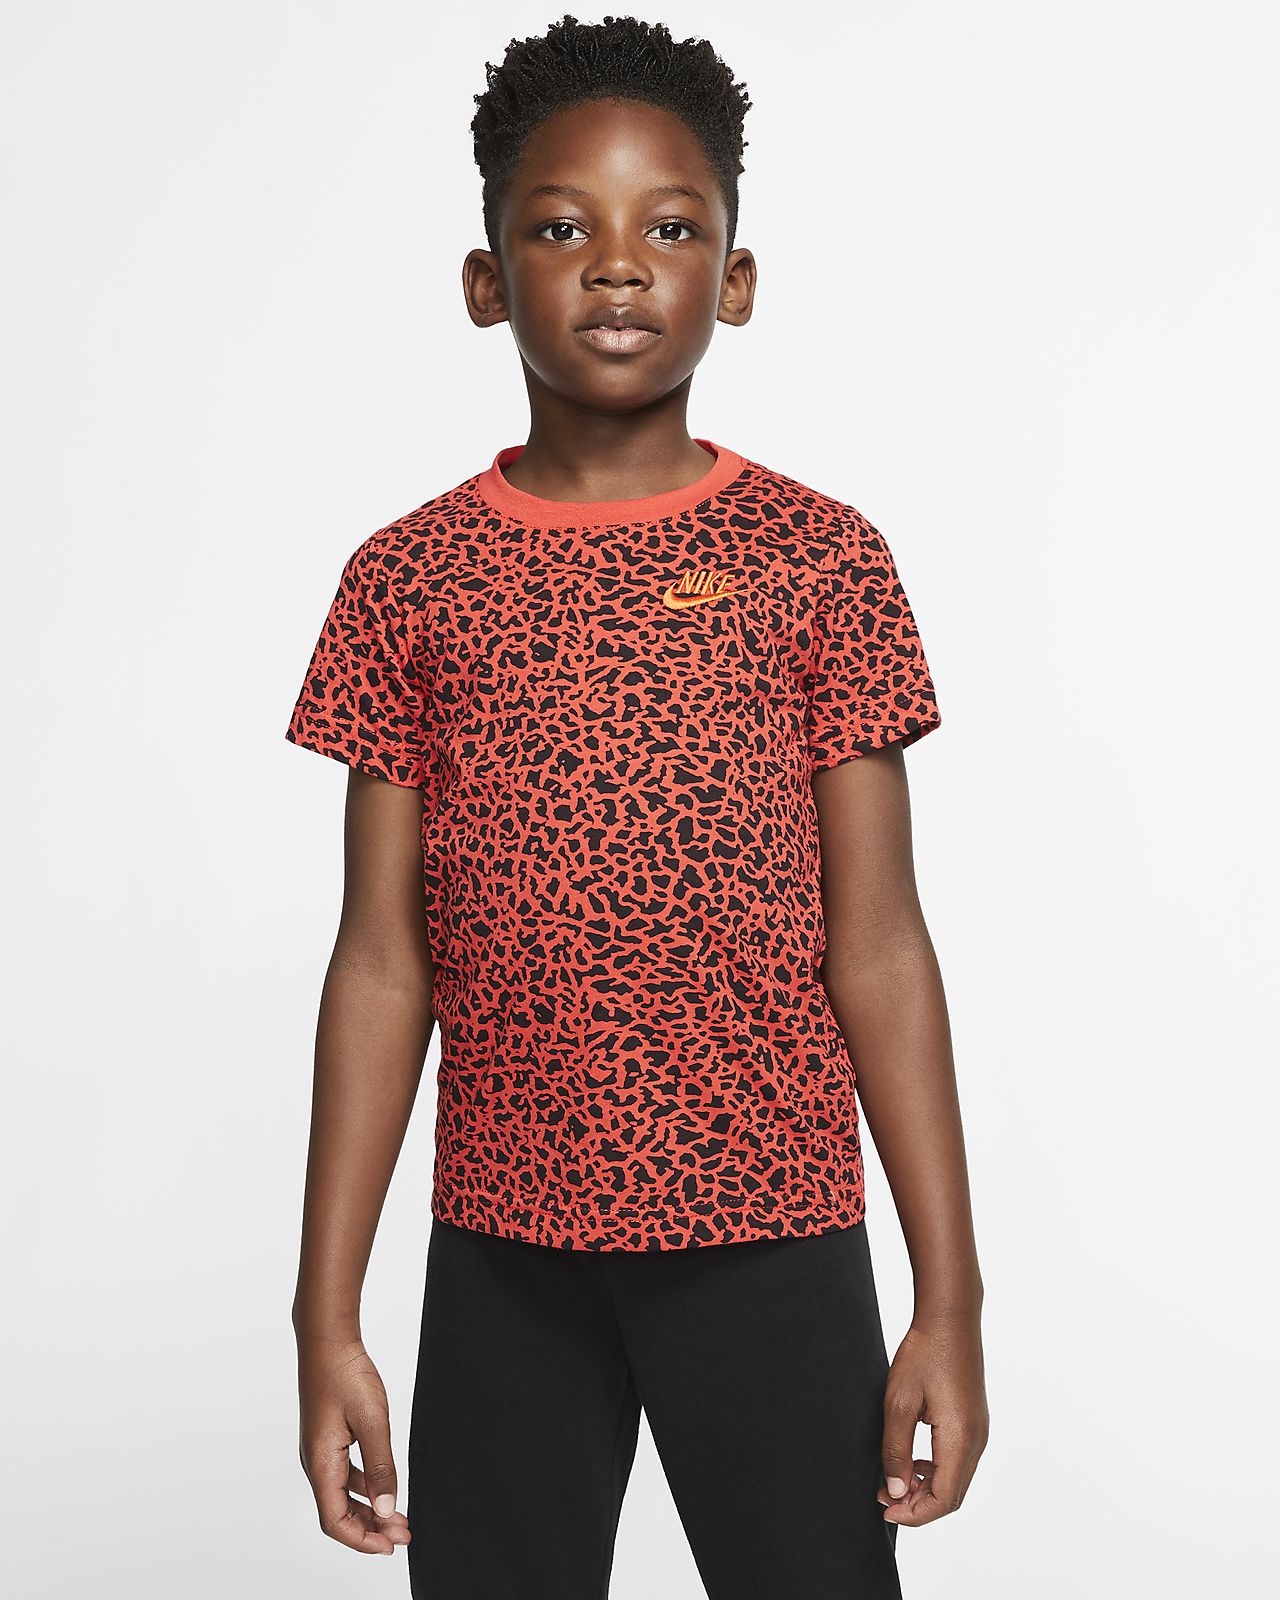 nike t shirts for toddlers